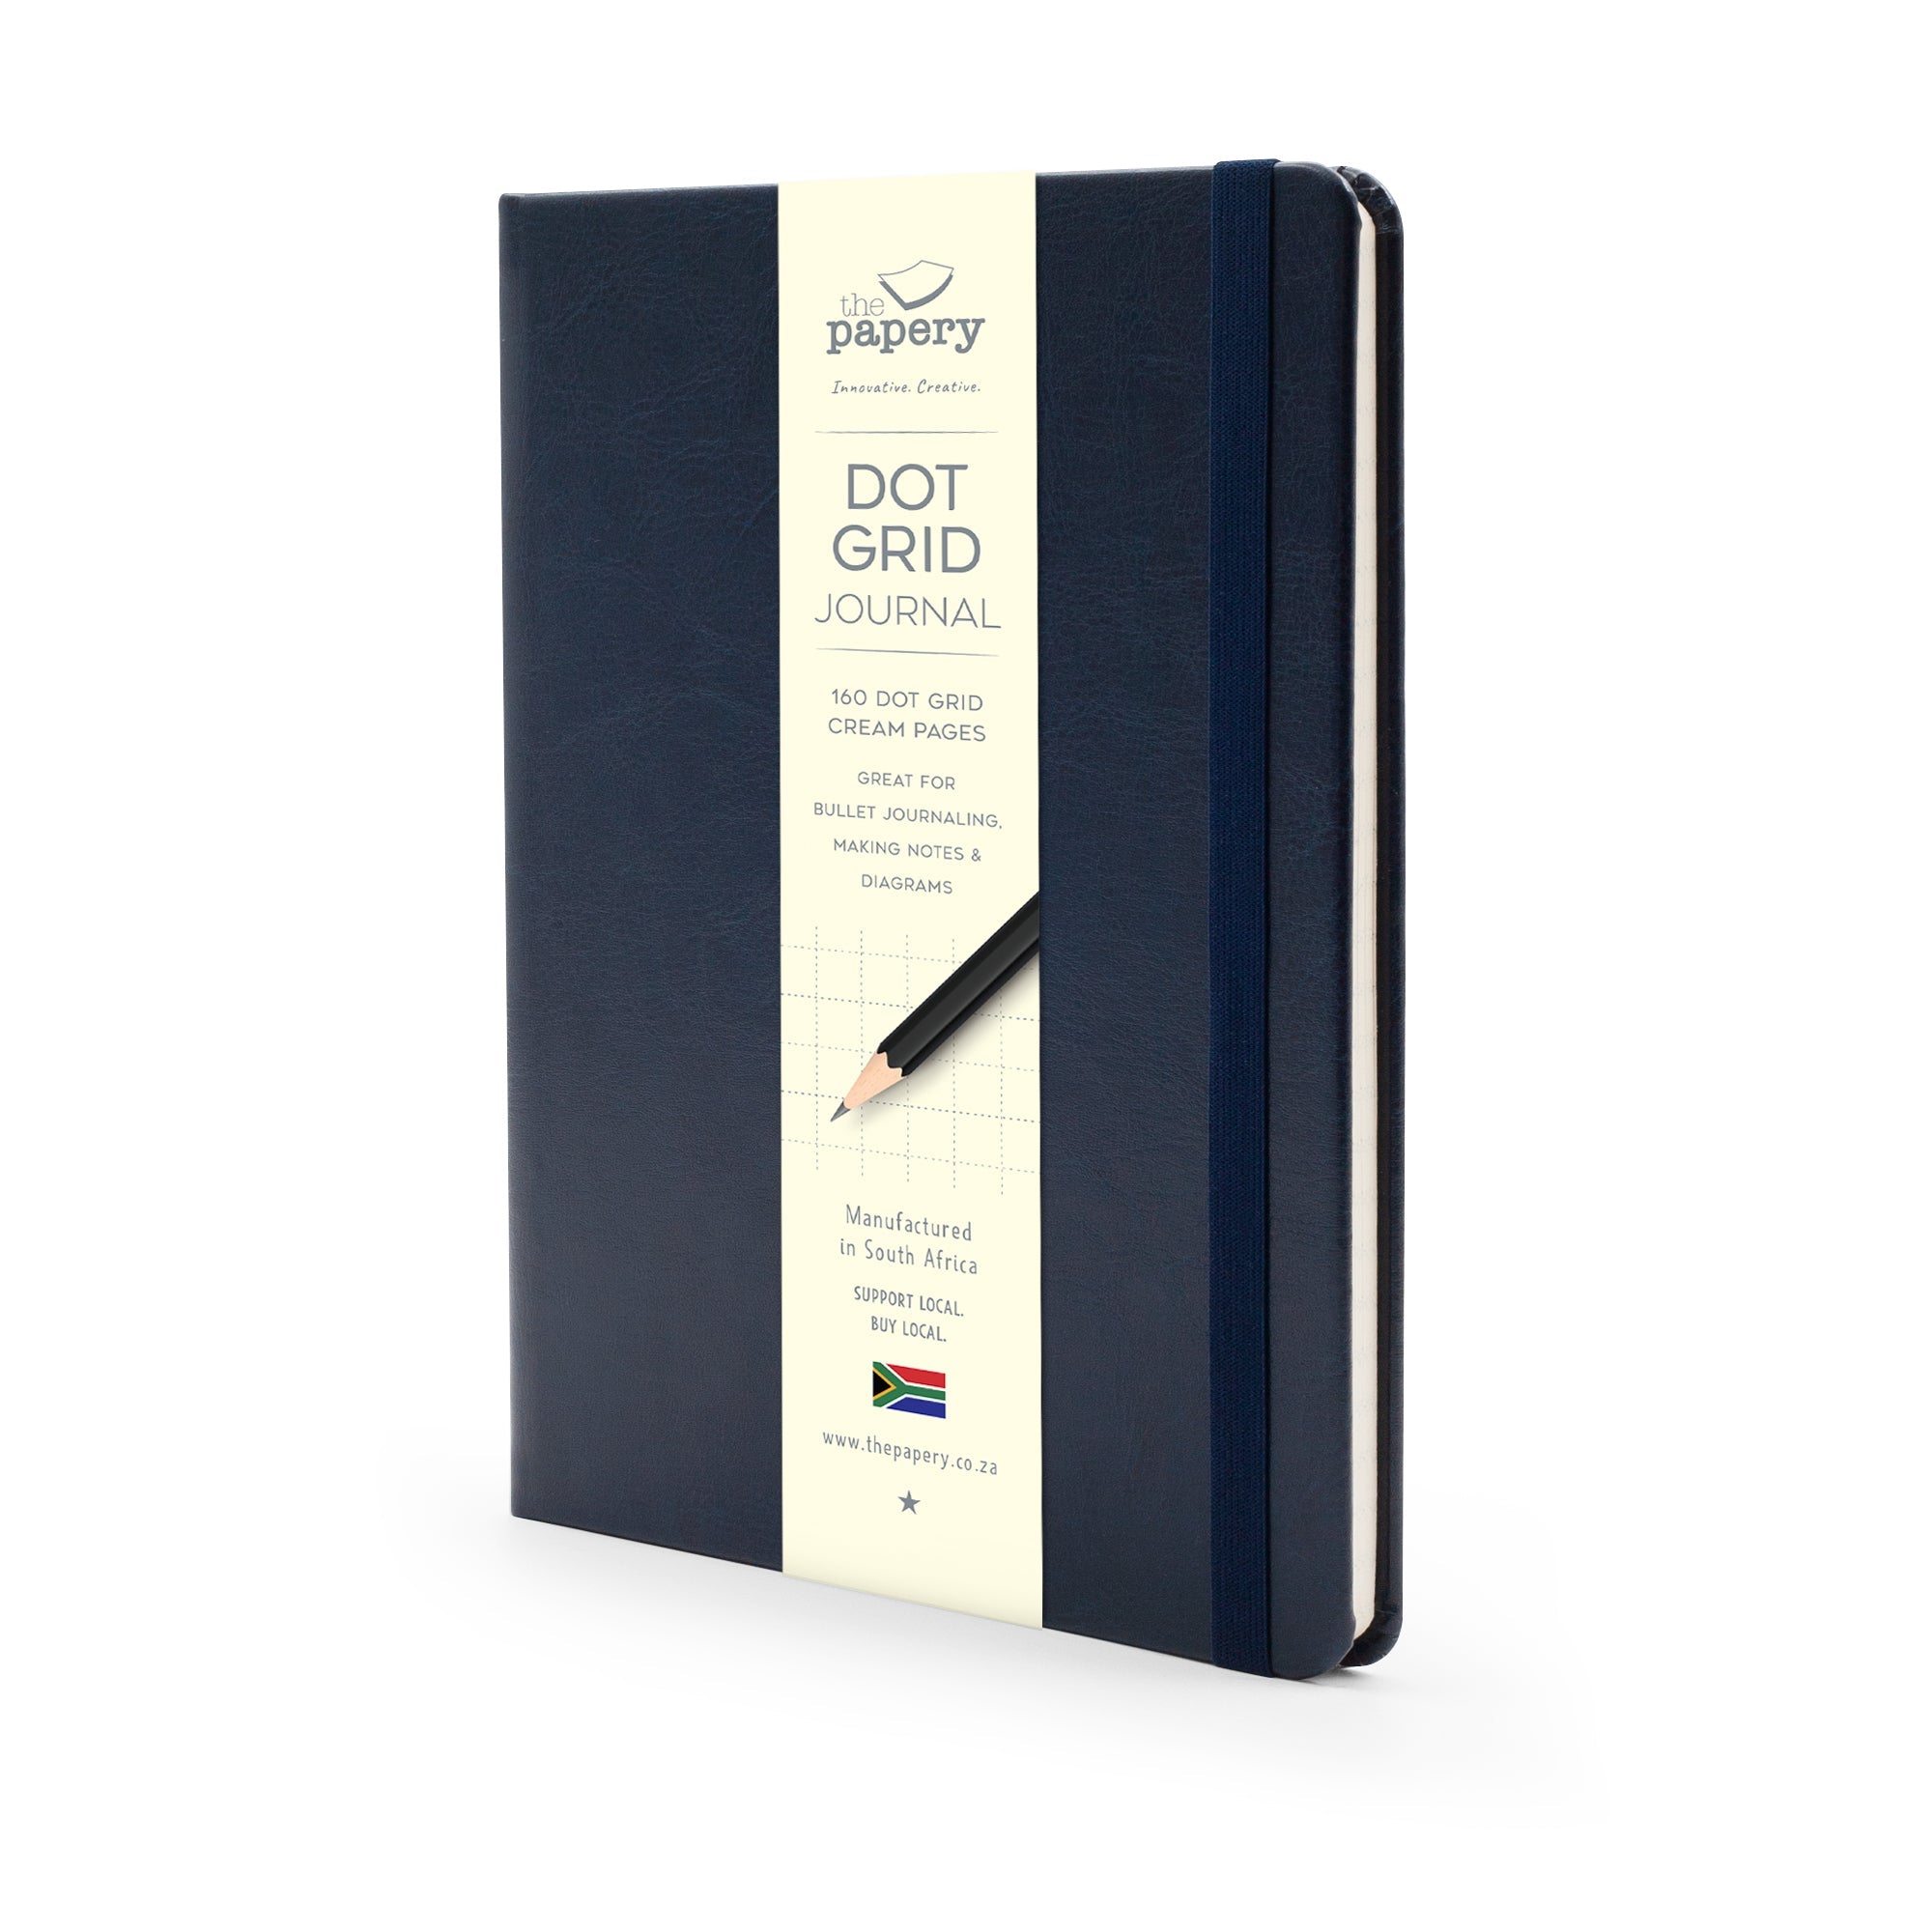 Image shows a Navy Blue dot grid Classic hardcover journal